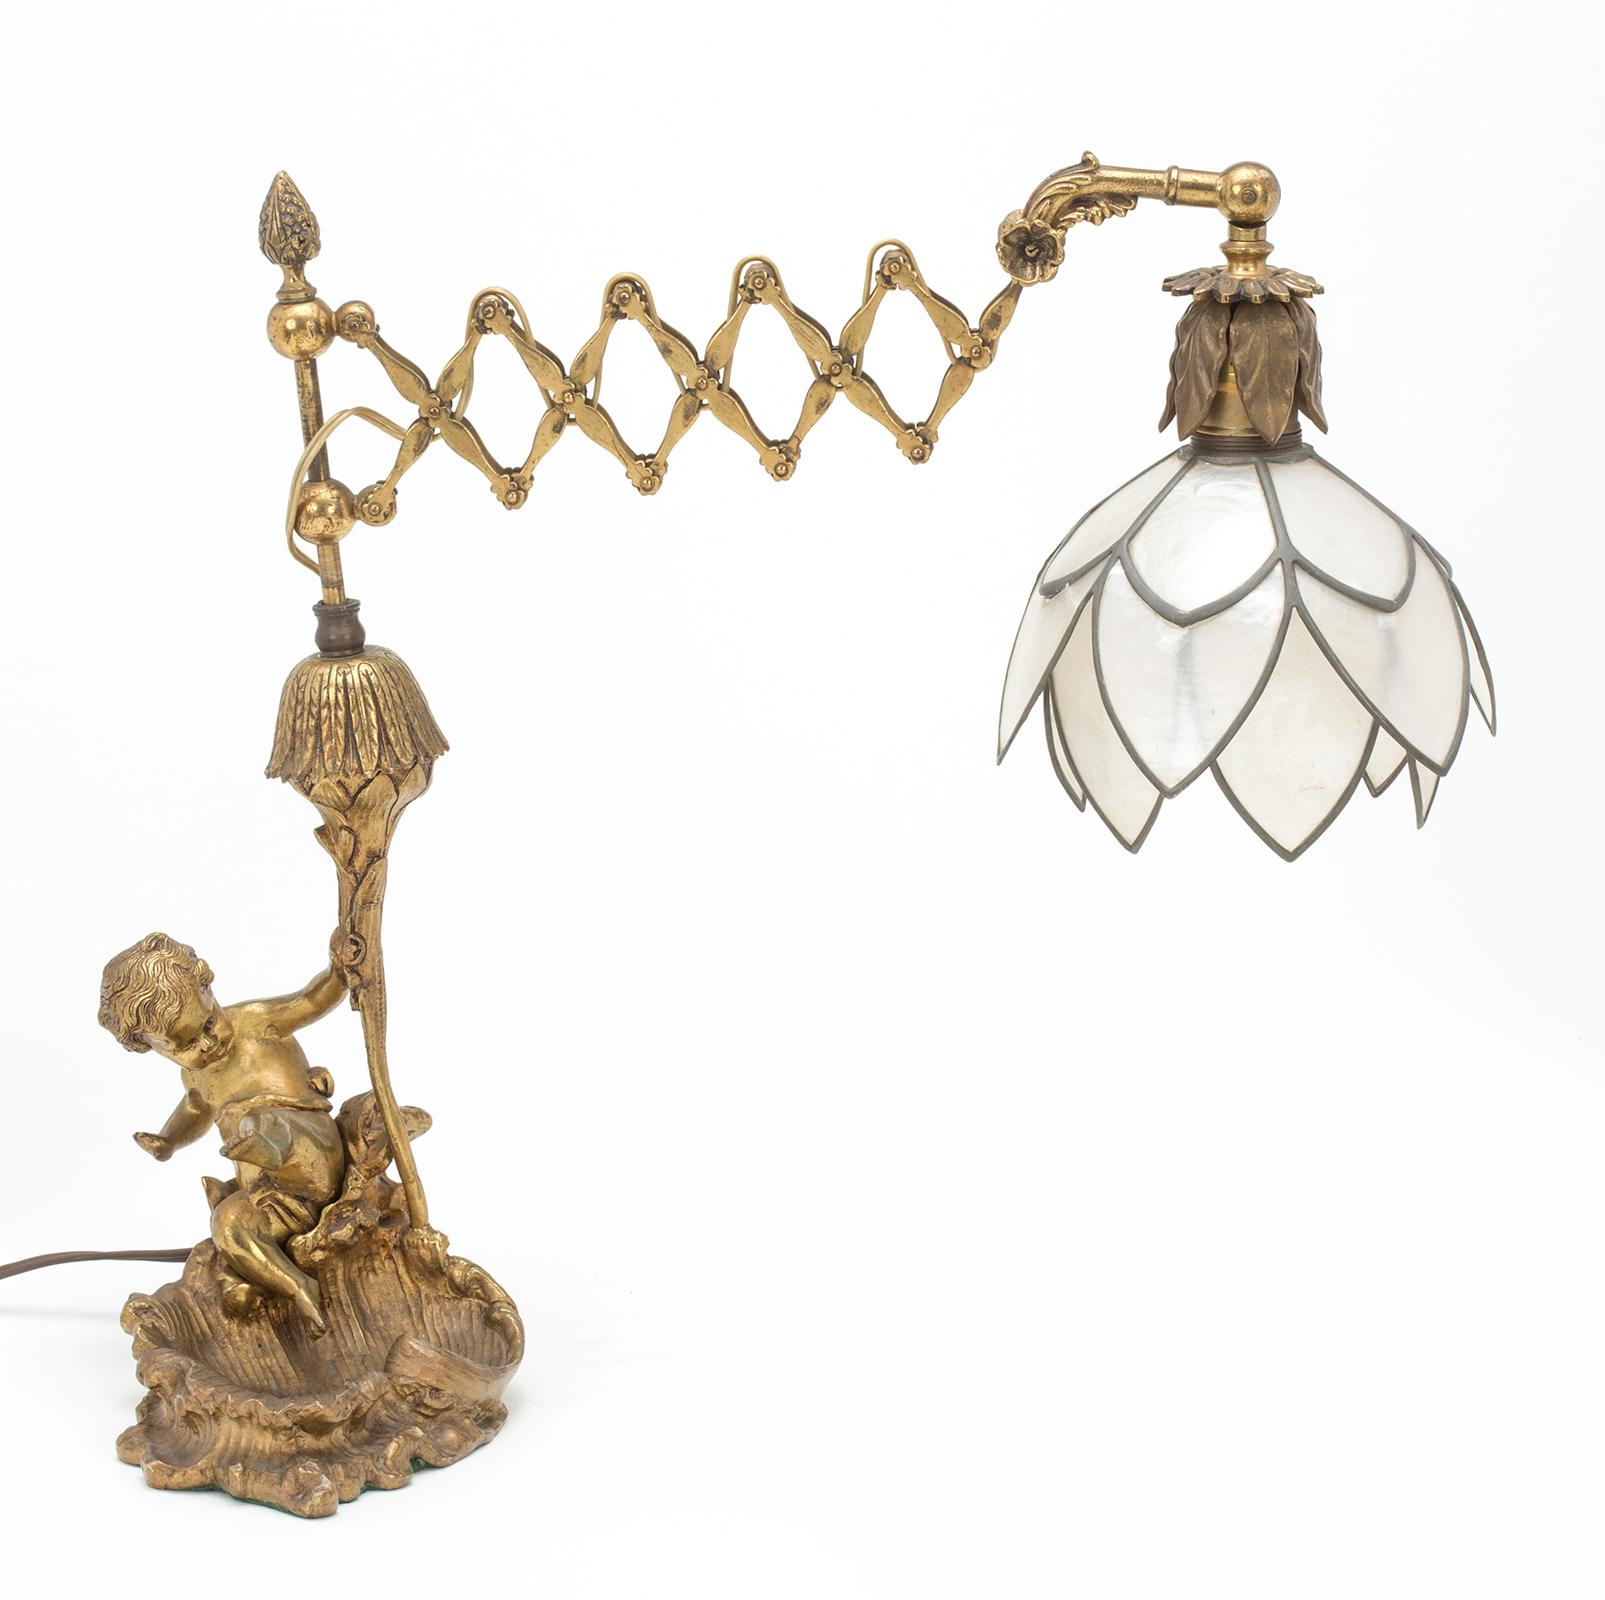 Charming gilt bronze cherub holding up light post that extends and retracts for easy reading. The shade is petals shaped layers of mica shells, giving a soft luminescent light.